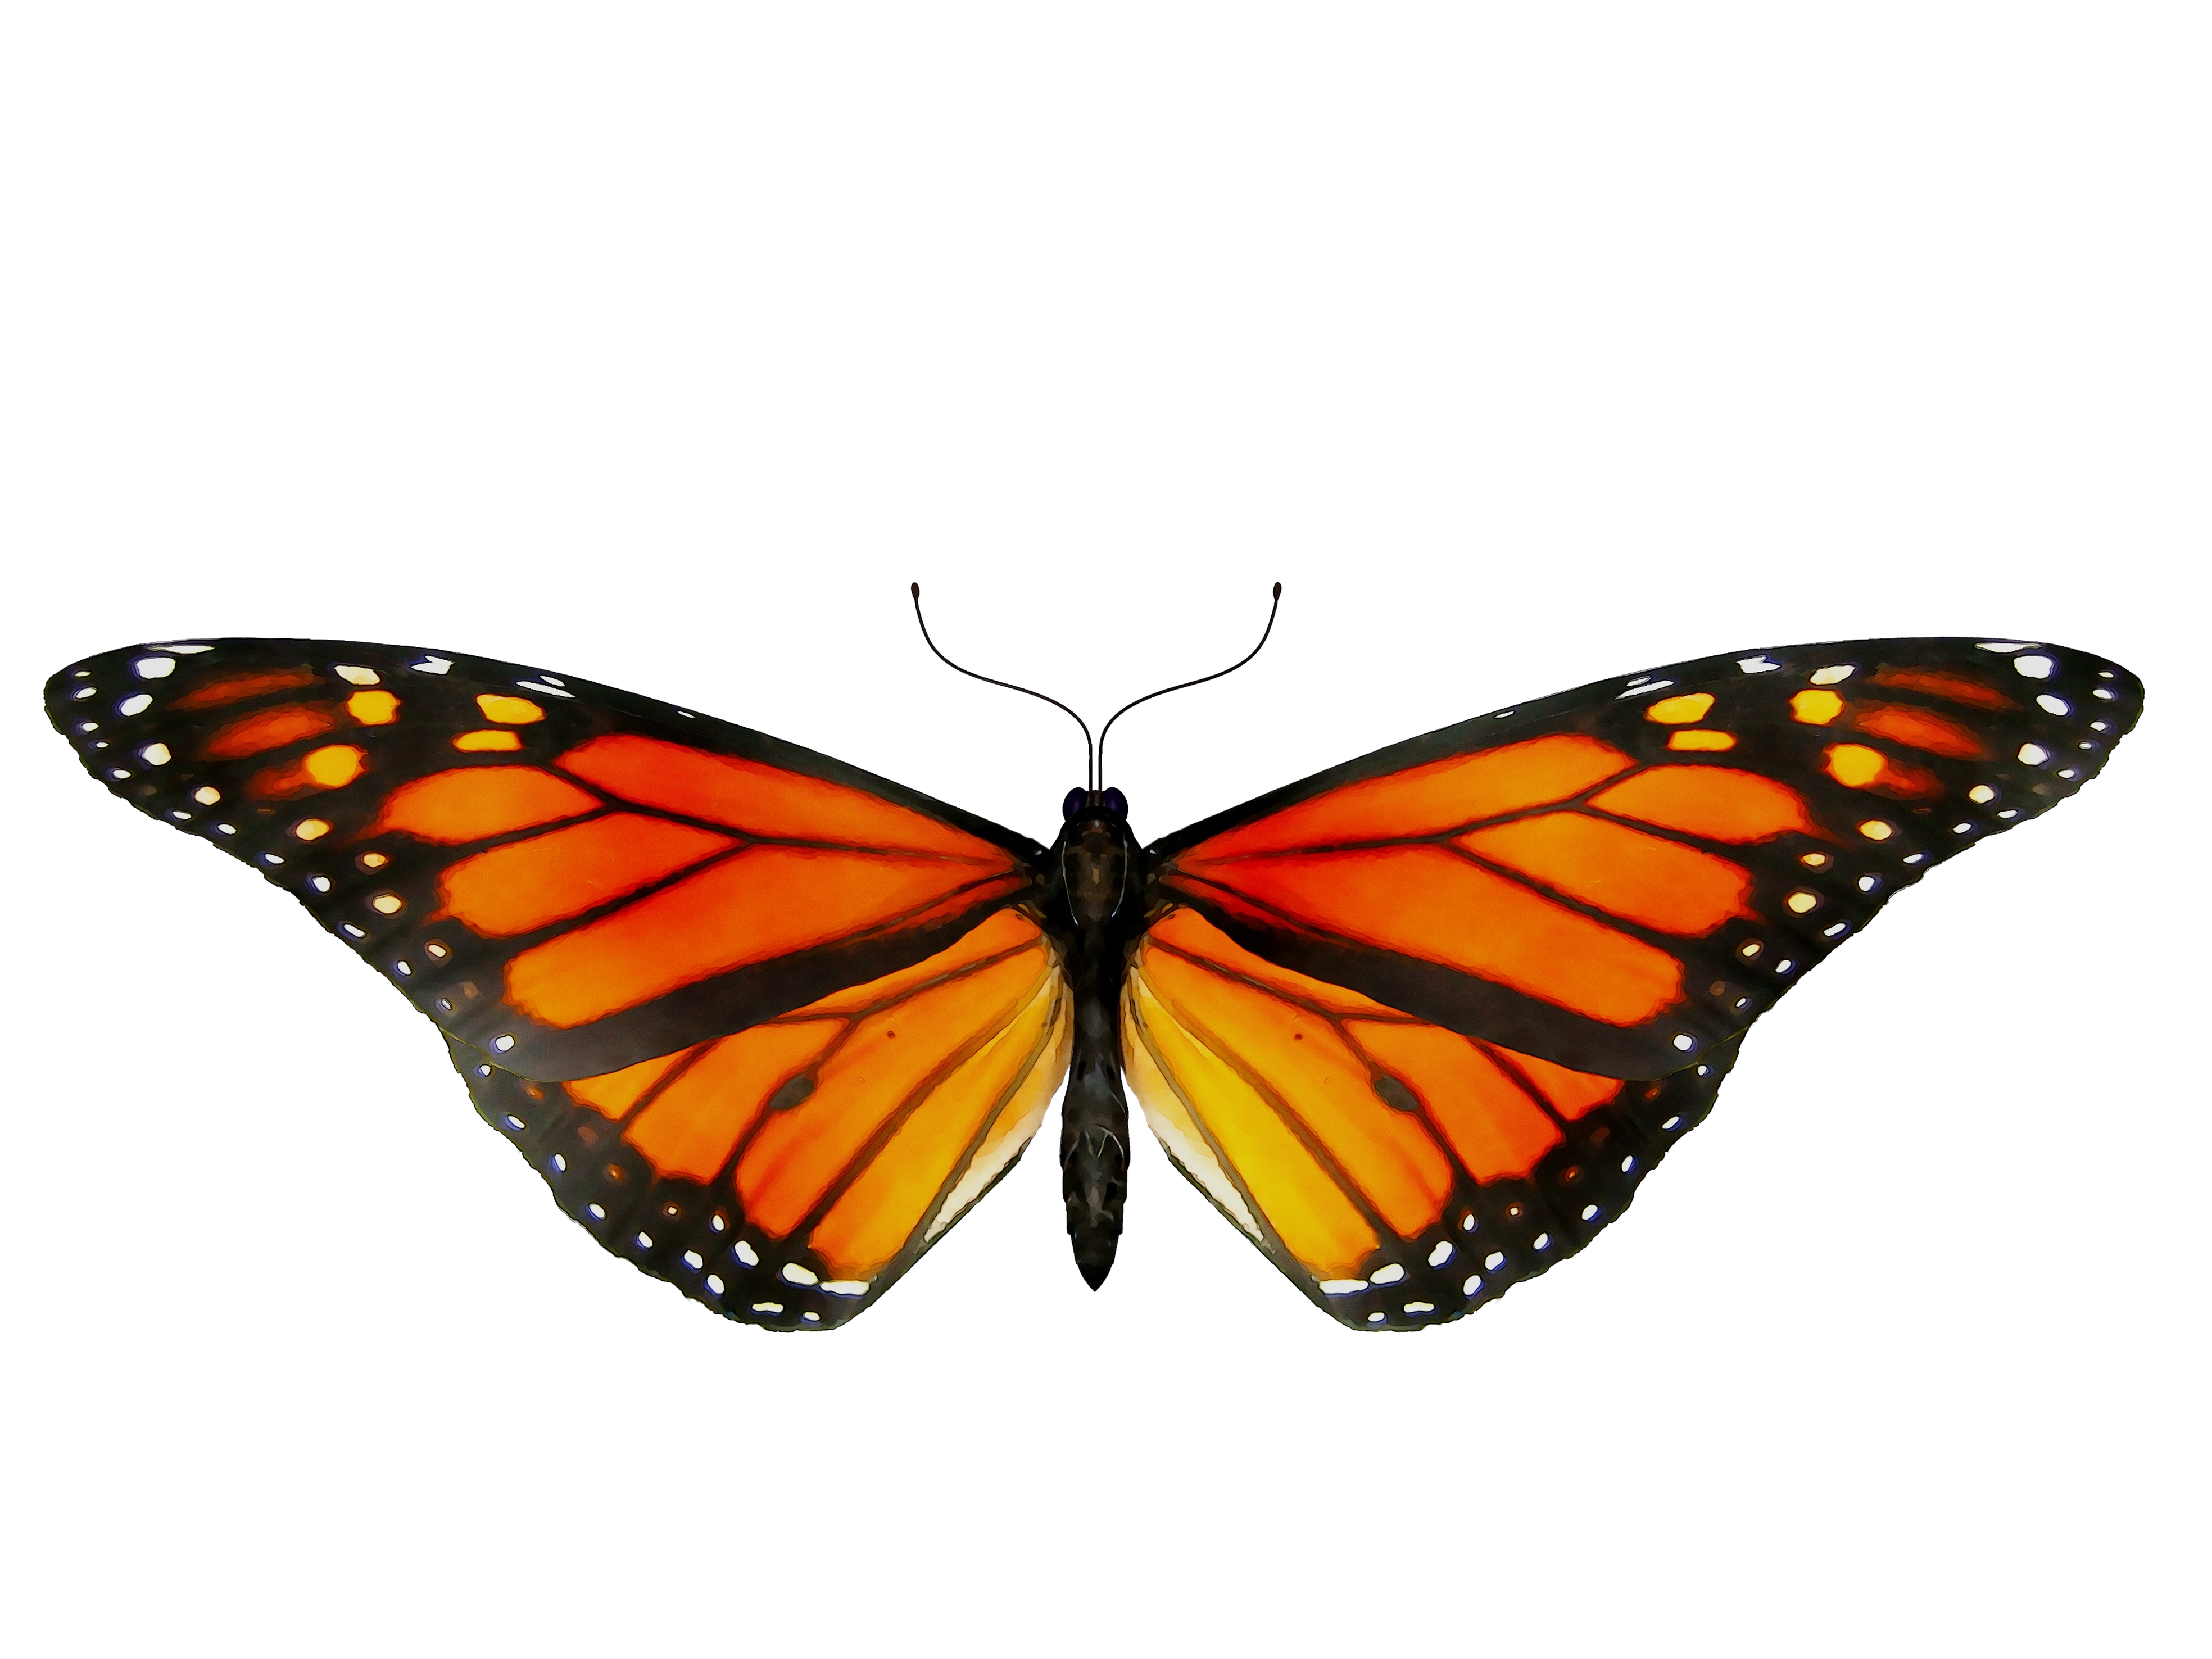 Animated Butterfly Gif Png Original file at image gif format